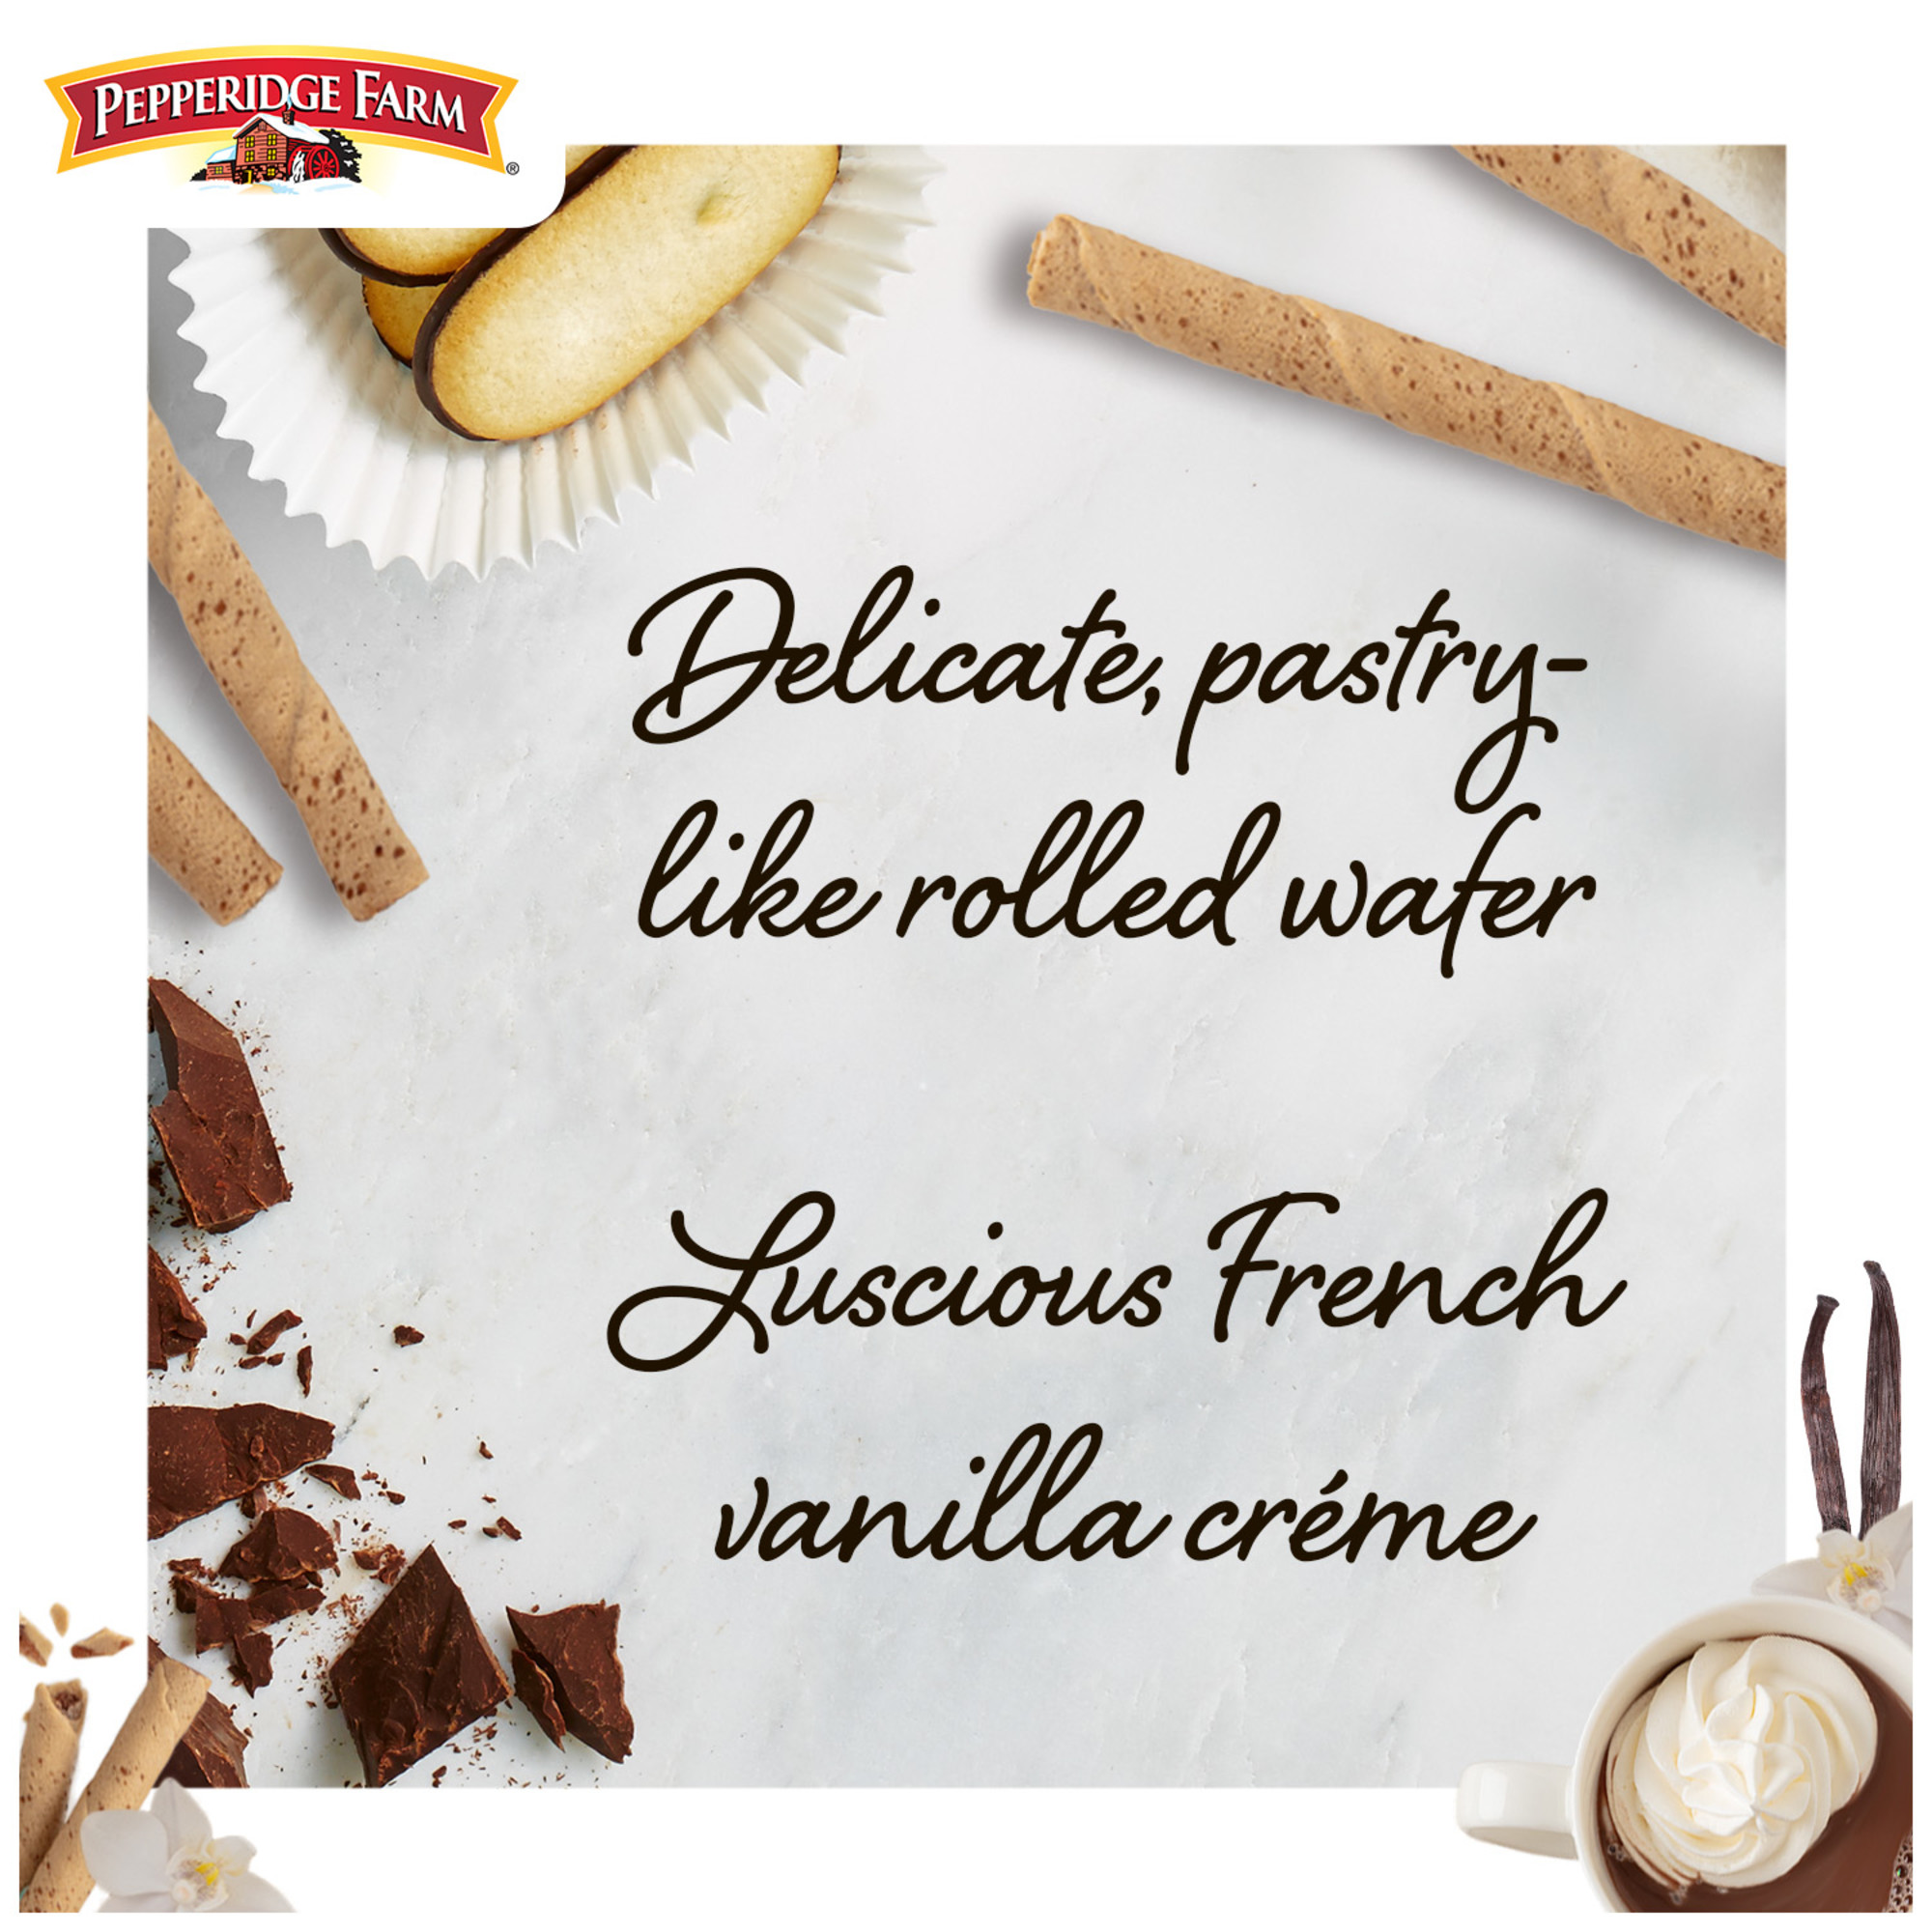 Pepperidge Farm Pirouette Cookies, French Vanilla Crème Filled Wafers, 13.5 oz Tin - image 2 of 9